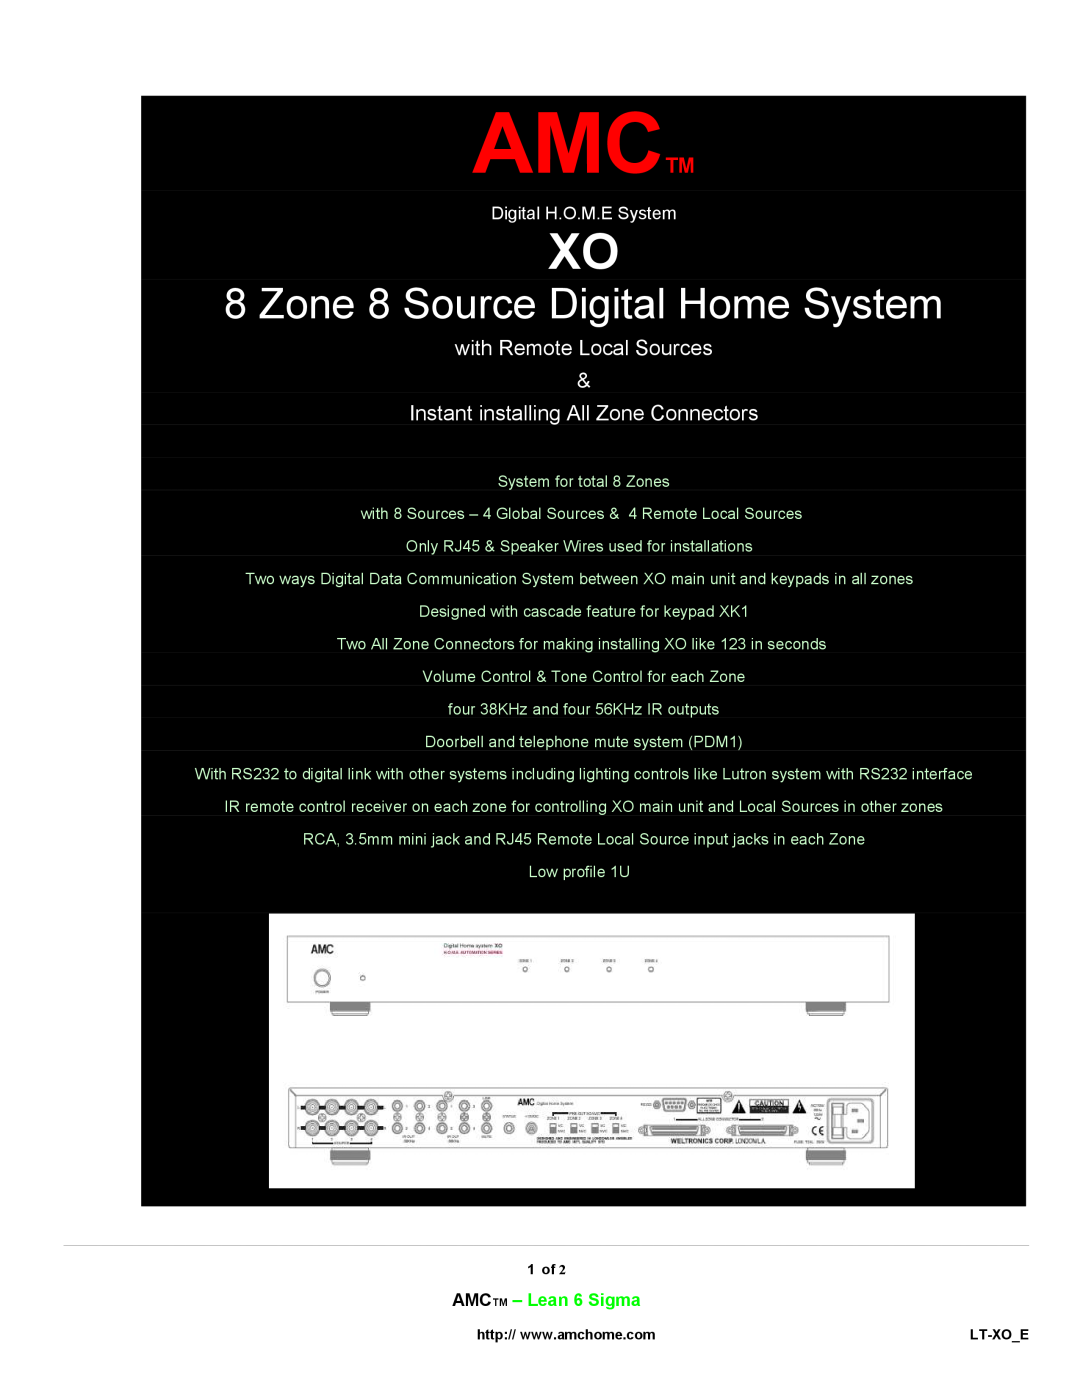 AMC XO manual AMCTM - Lean 6 Sigma, Amctm, Zone 8 Source Digital Home System, with Remote Local Sources 